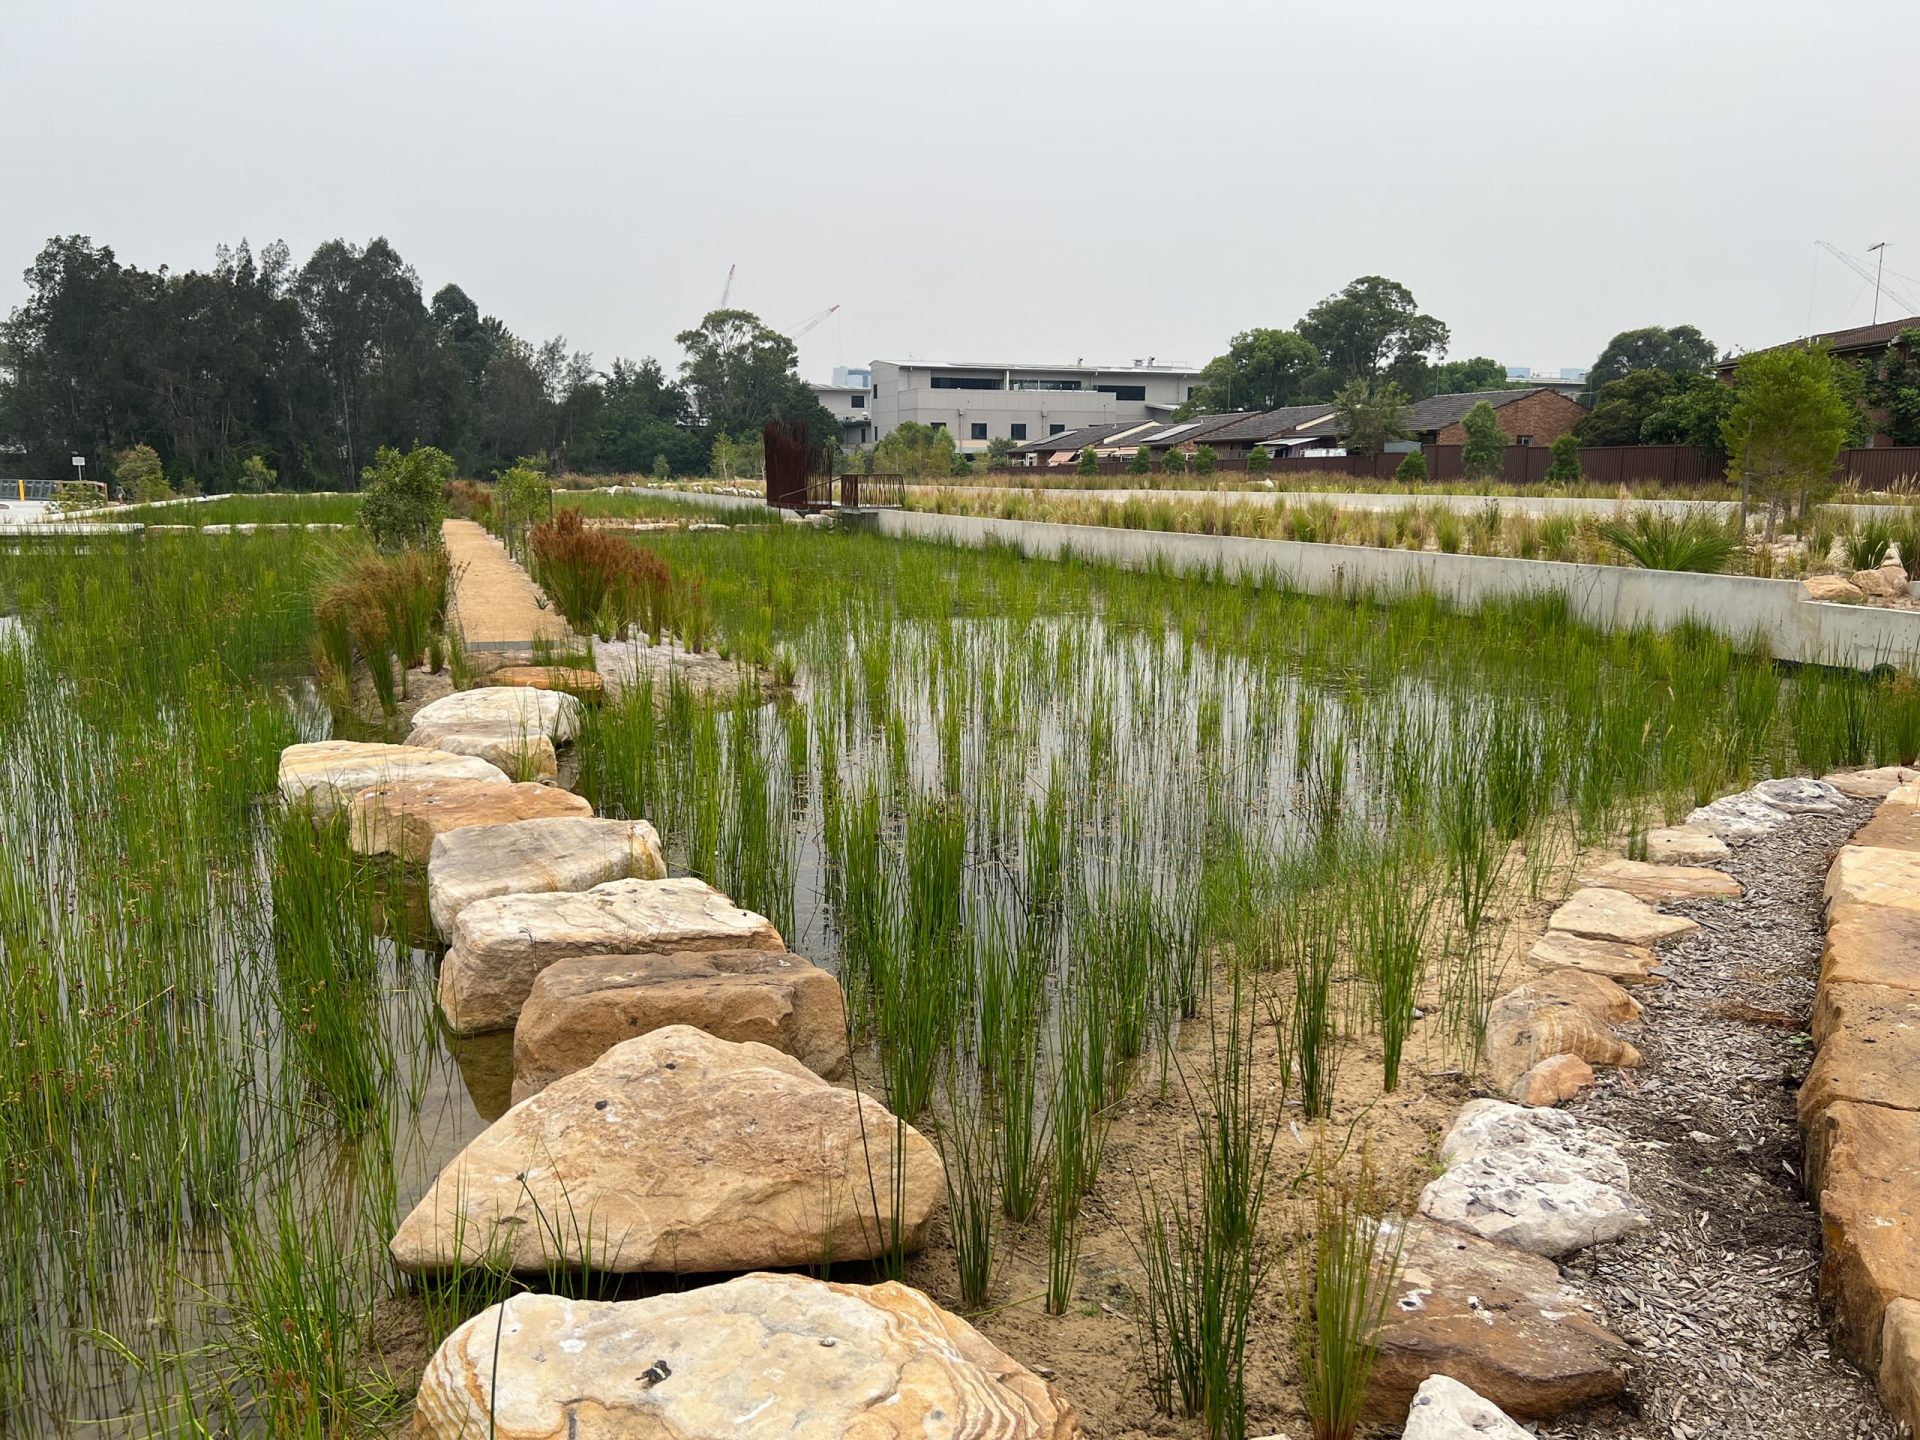 A natural wetland area with tall green reeds and grasses surrounded by large rocks and stone paths. A dirt pathway runs through the middle of the wetland, and buildings and trees are visible in the background under an overcast sky, contributing to Sydney's urban waterways' health.